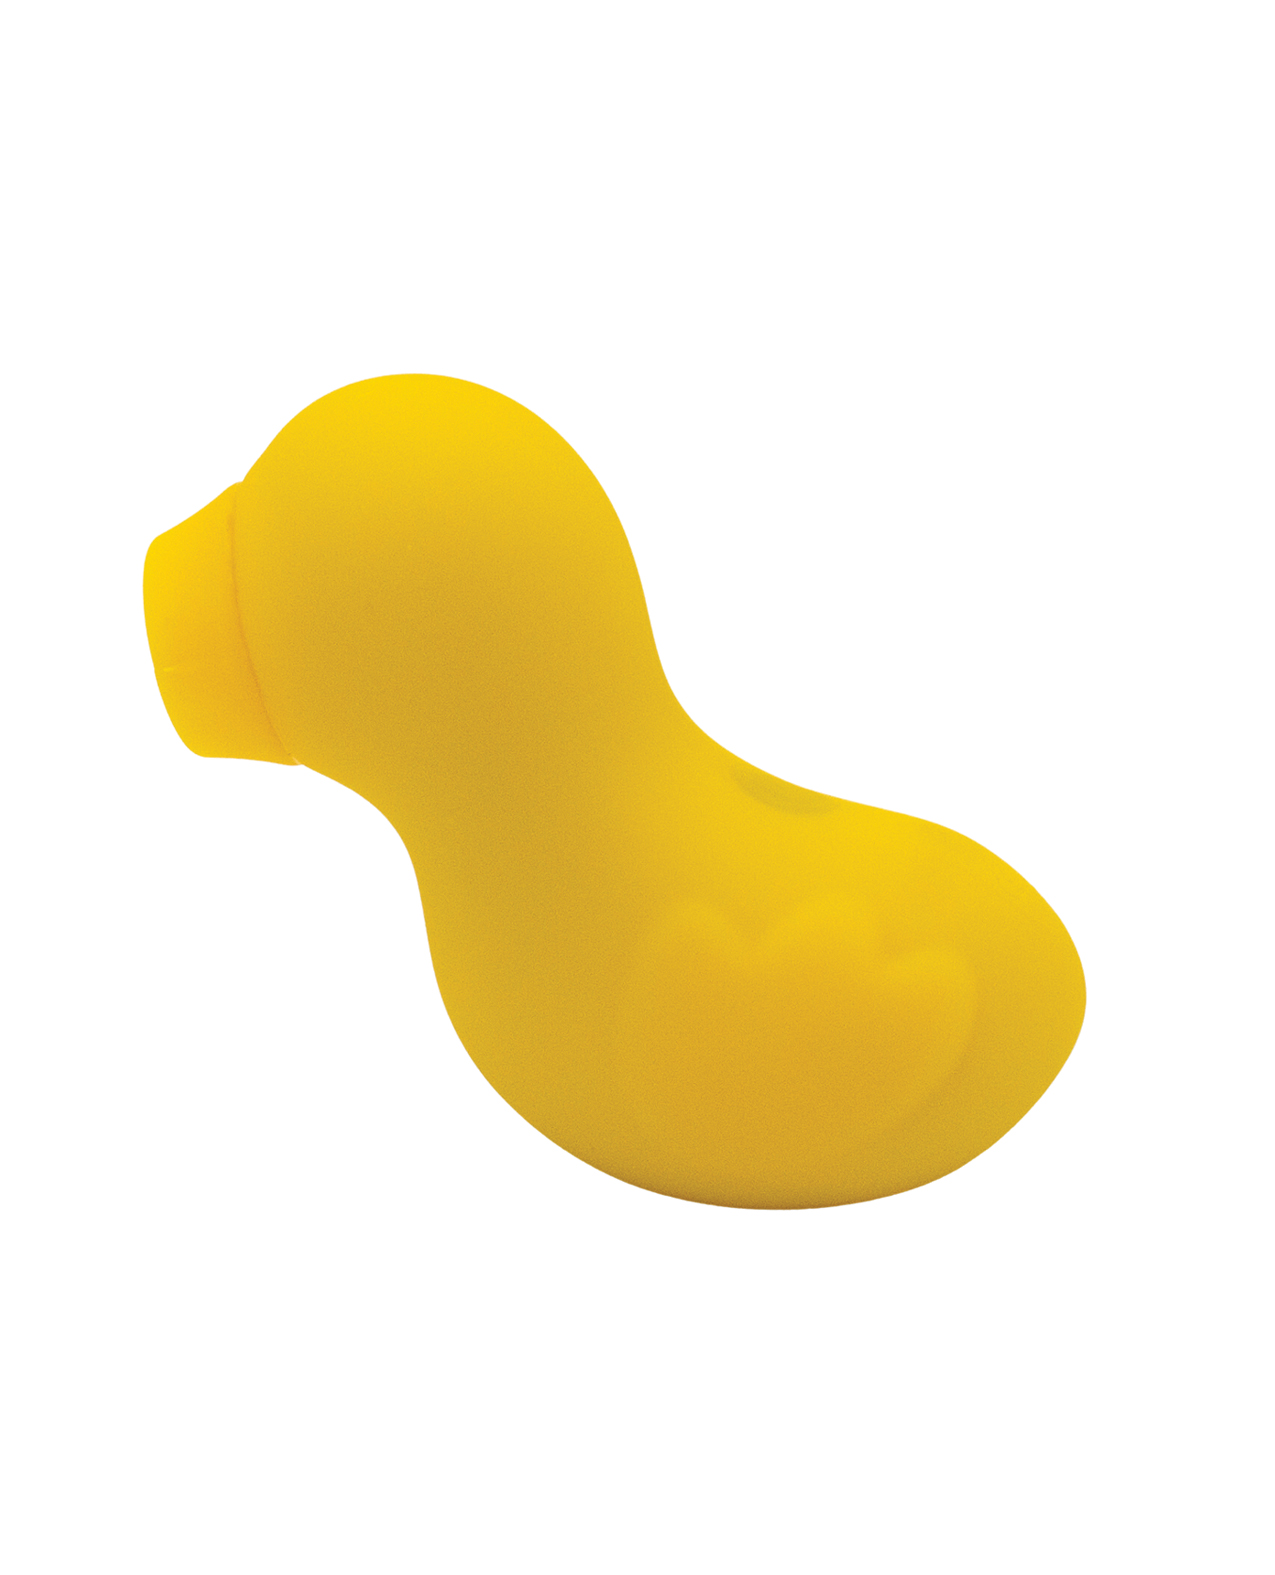 Lucky Duck yellow is a suction stimulator targeted for clitoral and nipple play